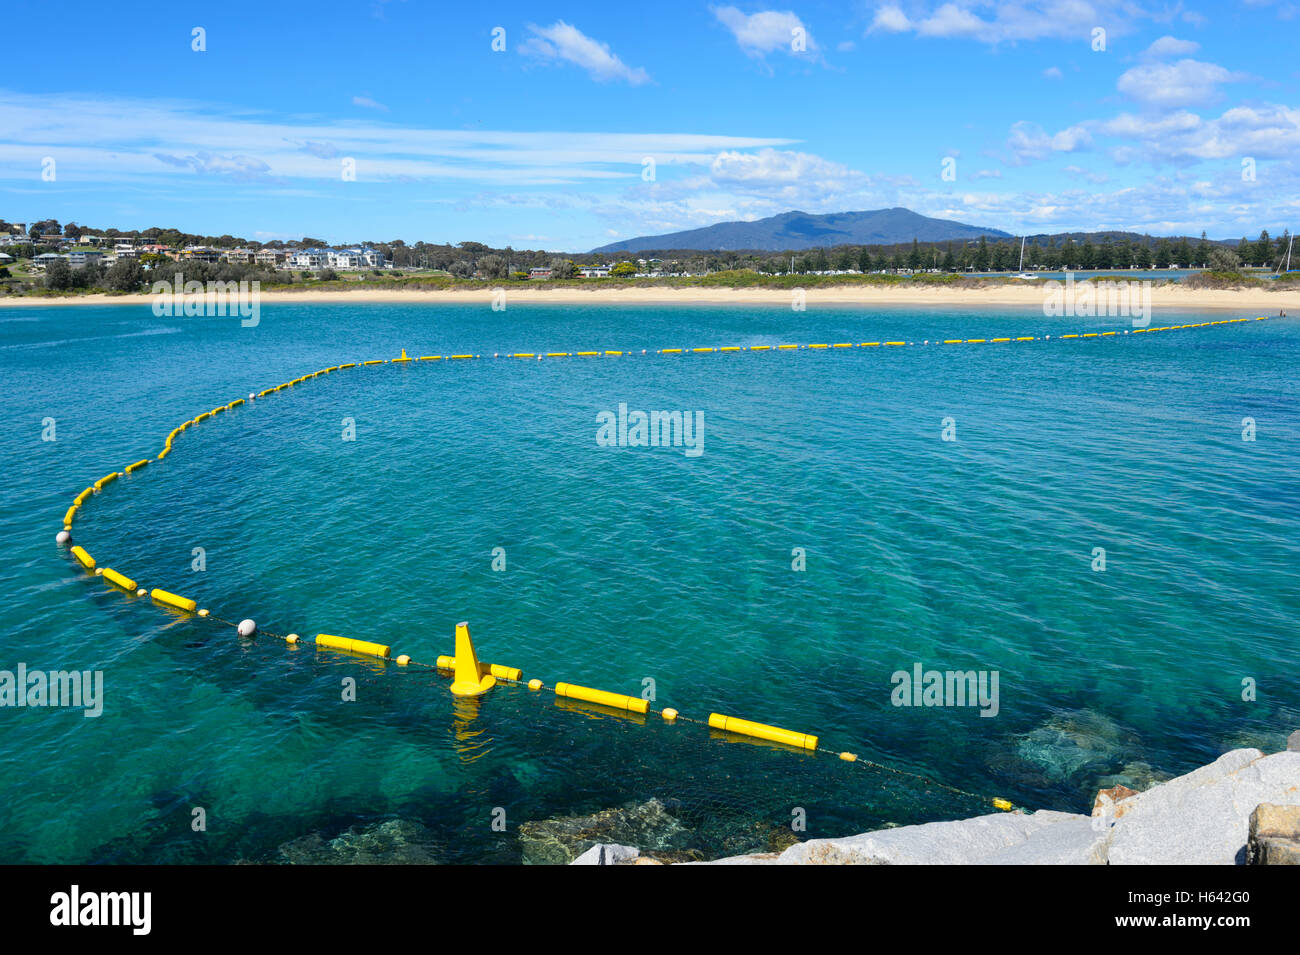 https://c8.alamy.com/comp/H642G0/swimming-area-protected-by-sharks-net-bar-beach-south-narooma-new-H642G0.jpg